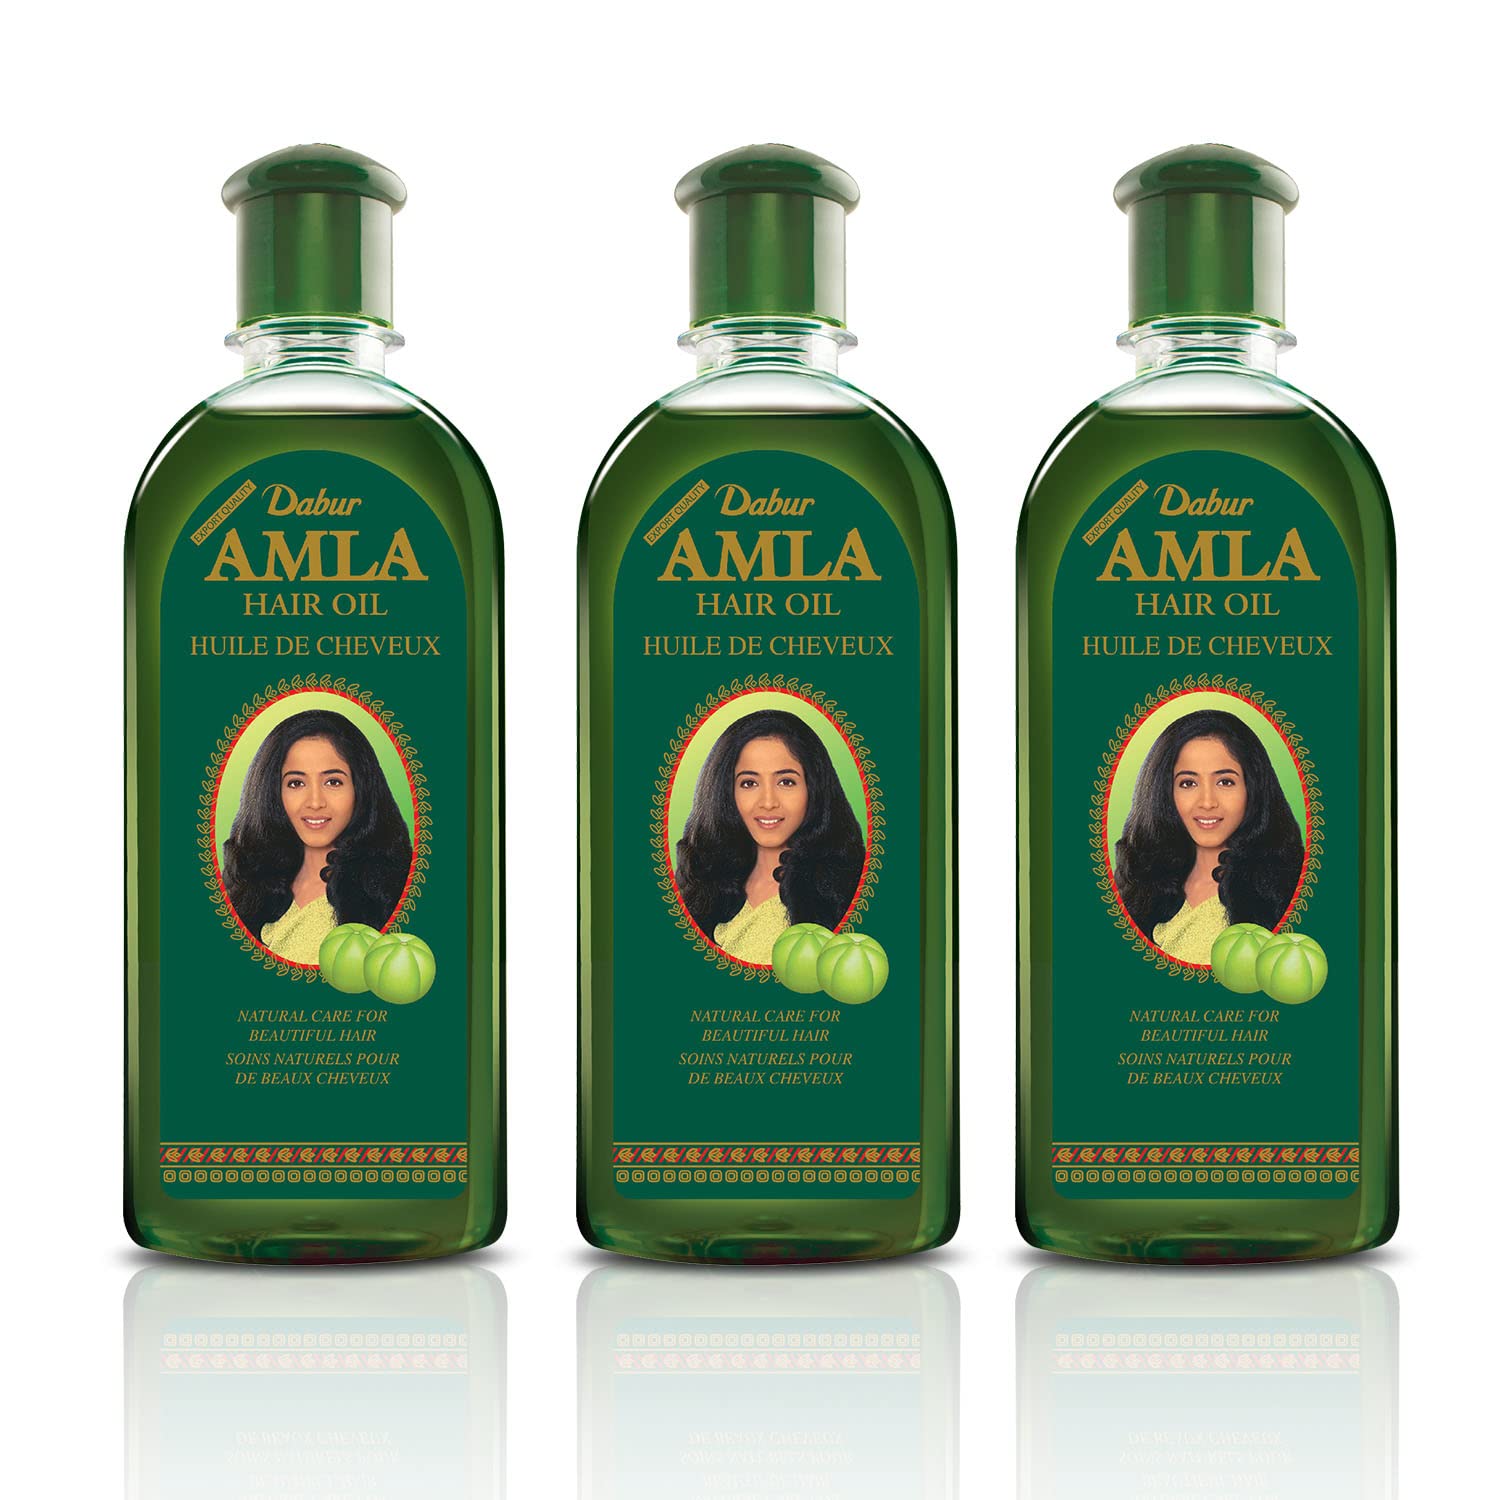 Dabur Amla Hair Oil - Amla Oil, Amla Hair Oil, Amla Oil for Healthy Hair and Moisturized Scalp, Indian Hair Oil for Men and Women, Bio Oil for Hair, Natural Care for Beautiful Hair (500ml, Pack of 3)